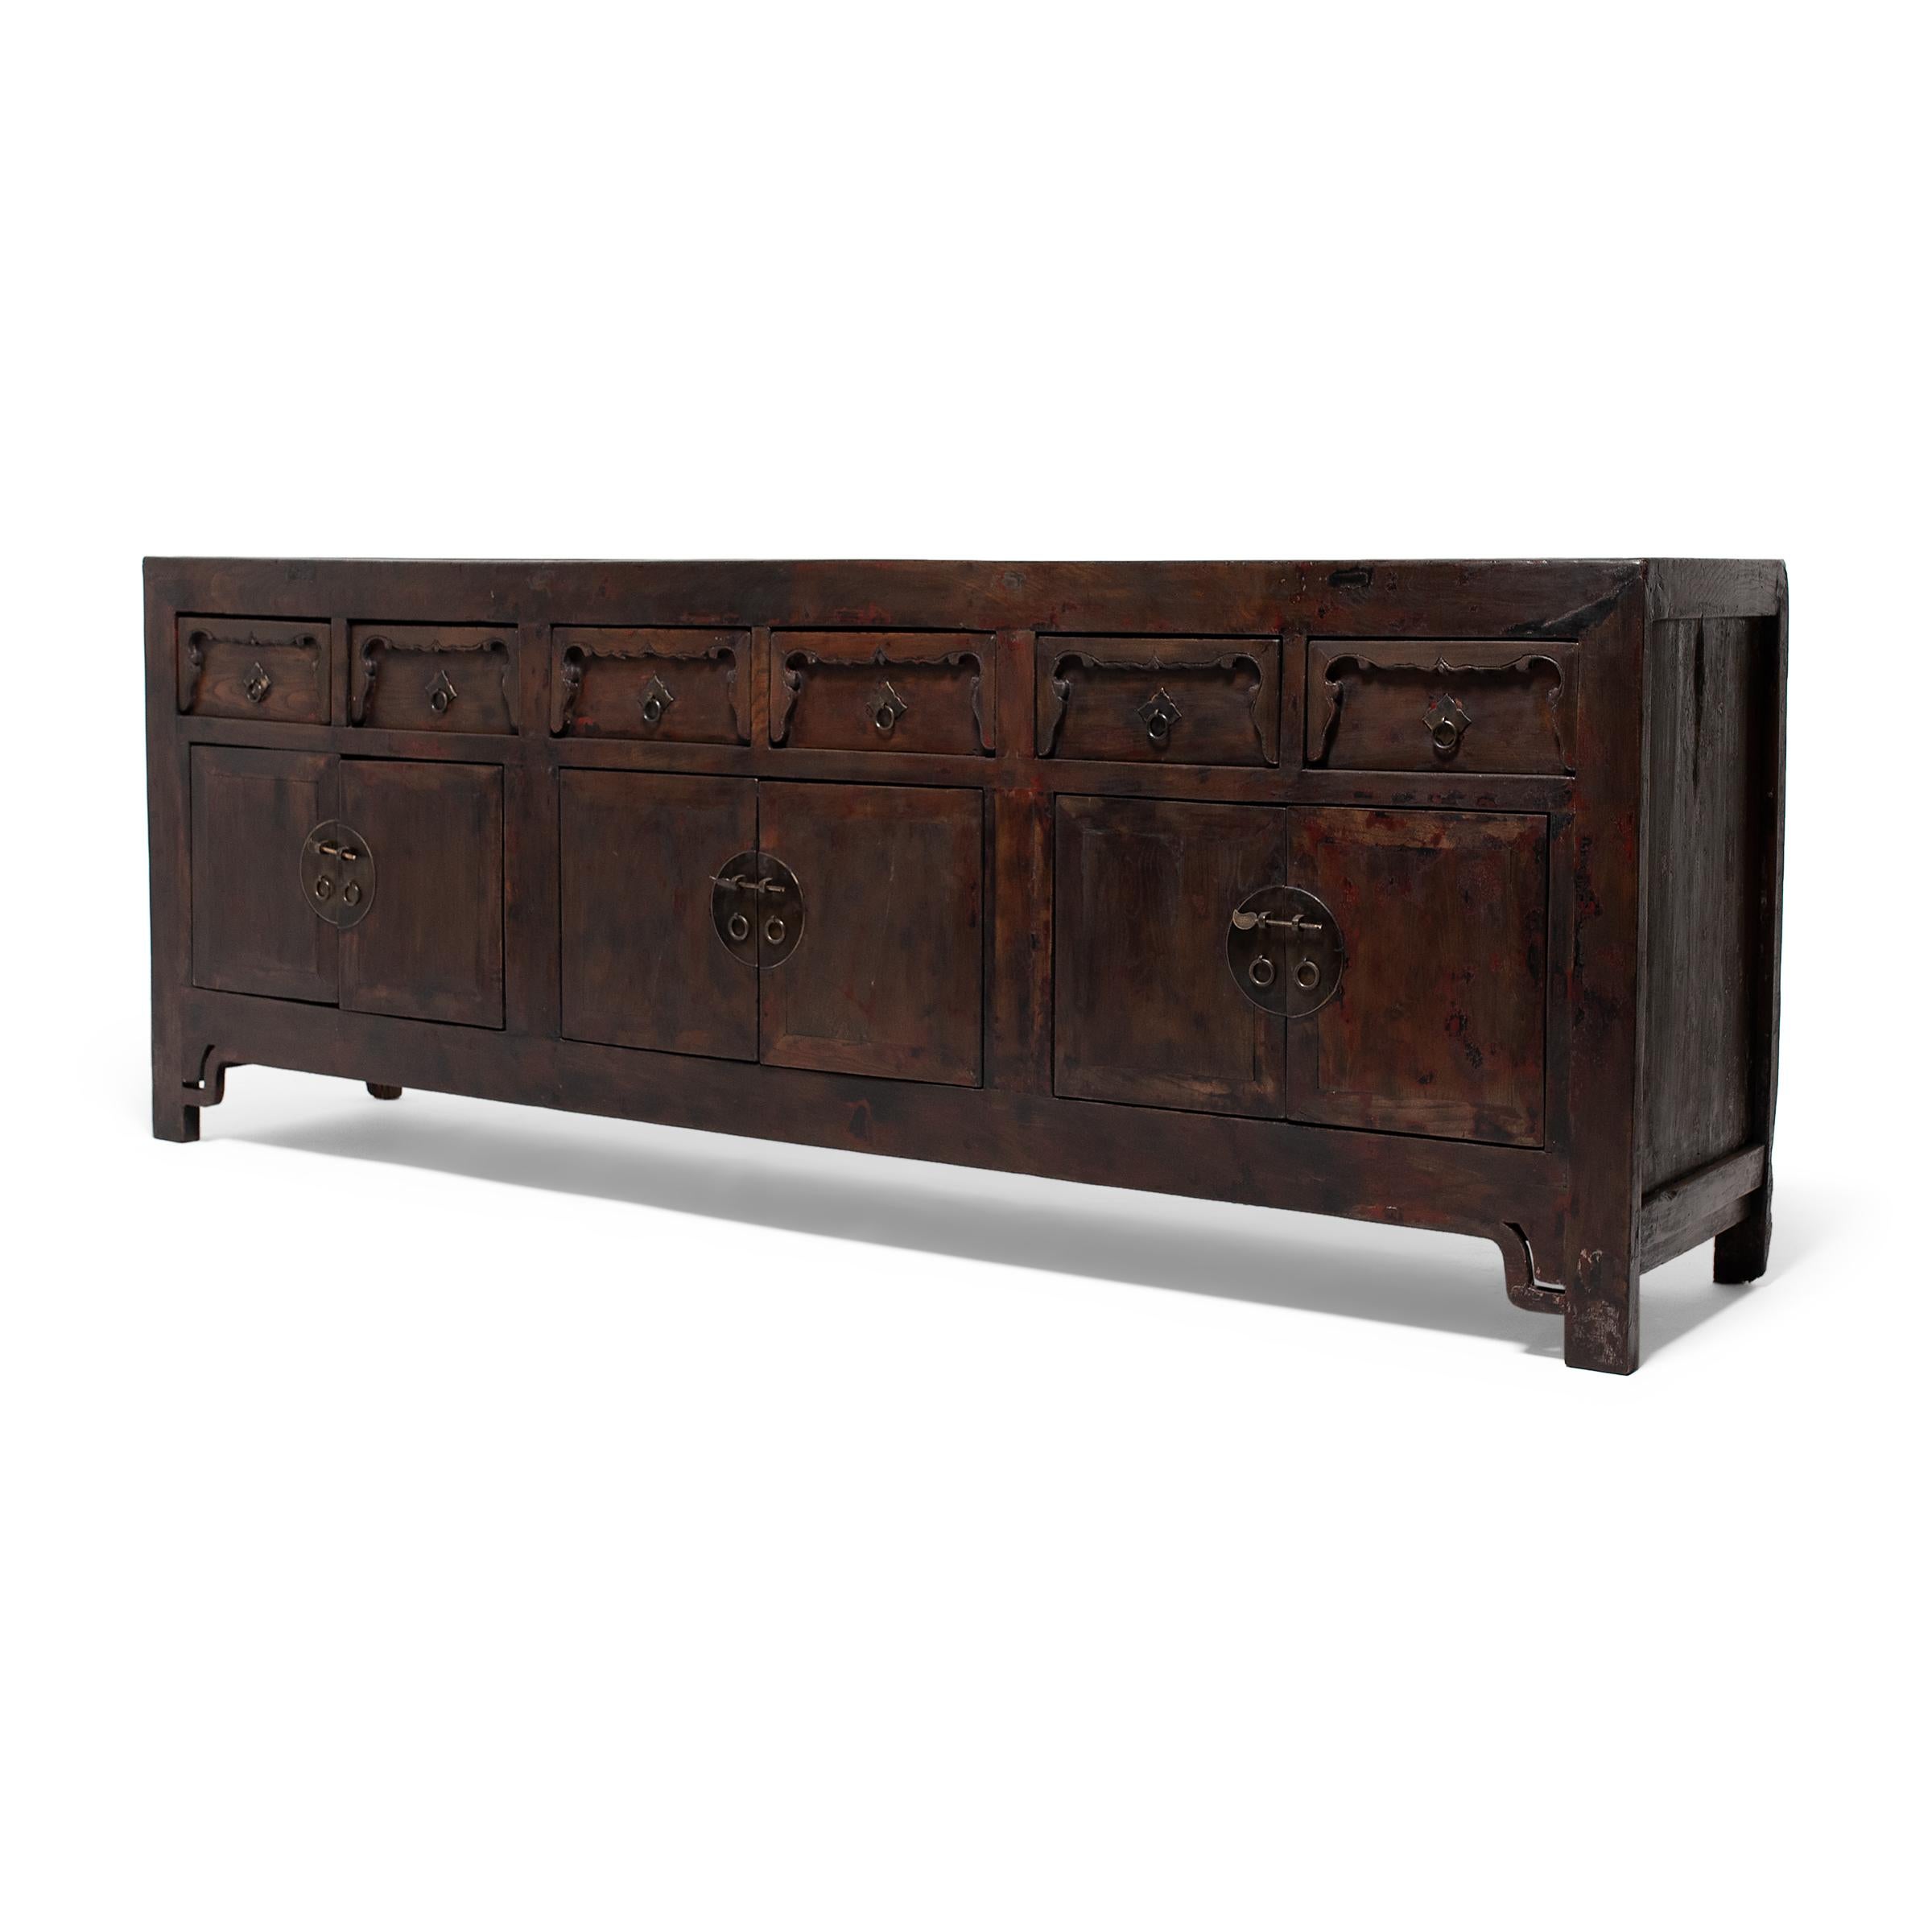 Created in the style of Mongolian storage coffers, this early 20th-century sideboard from Gansu province has a straightforward design and plenty of rustic appeal. Originally configured to open from the top, this chest was modified with front-facing